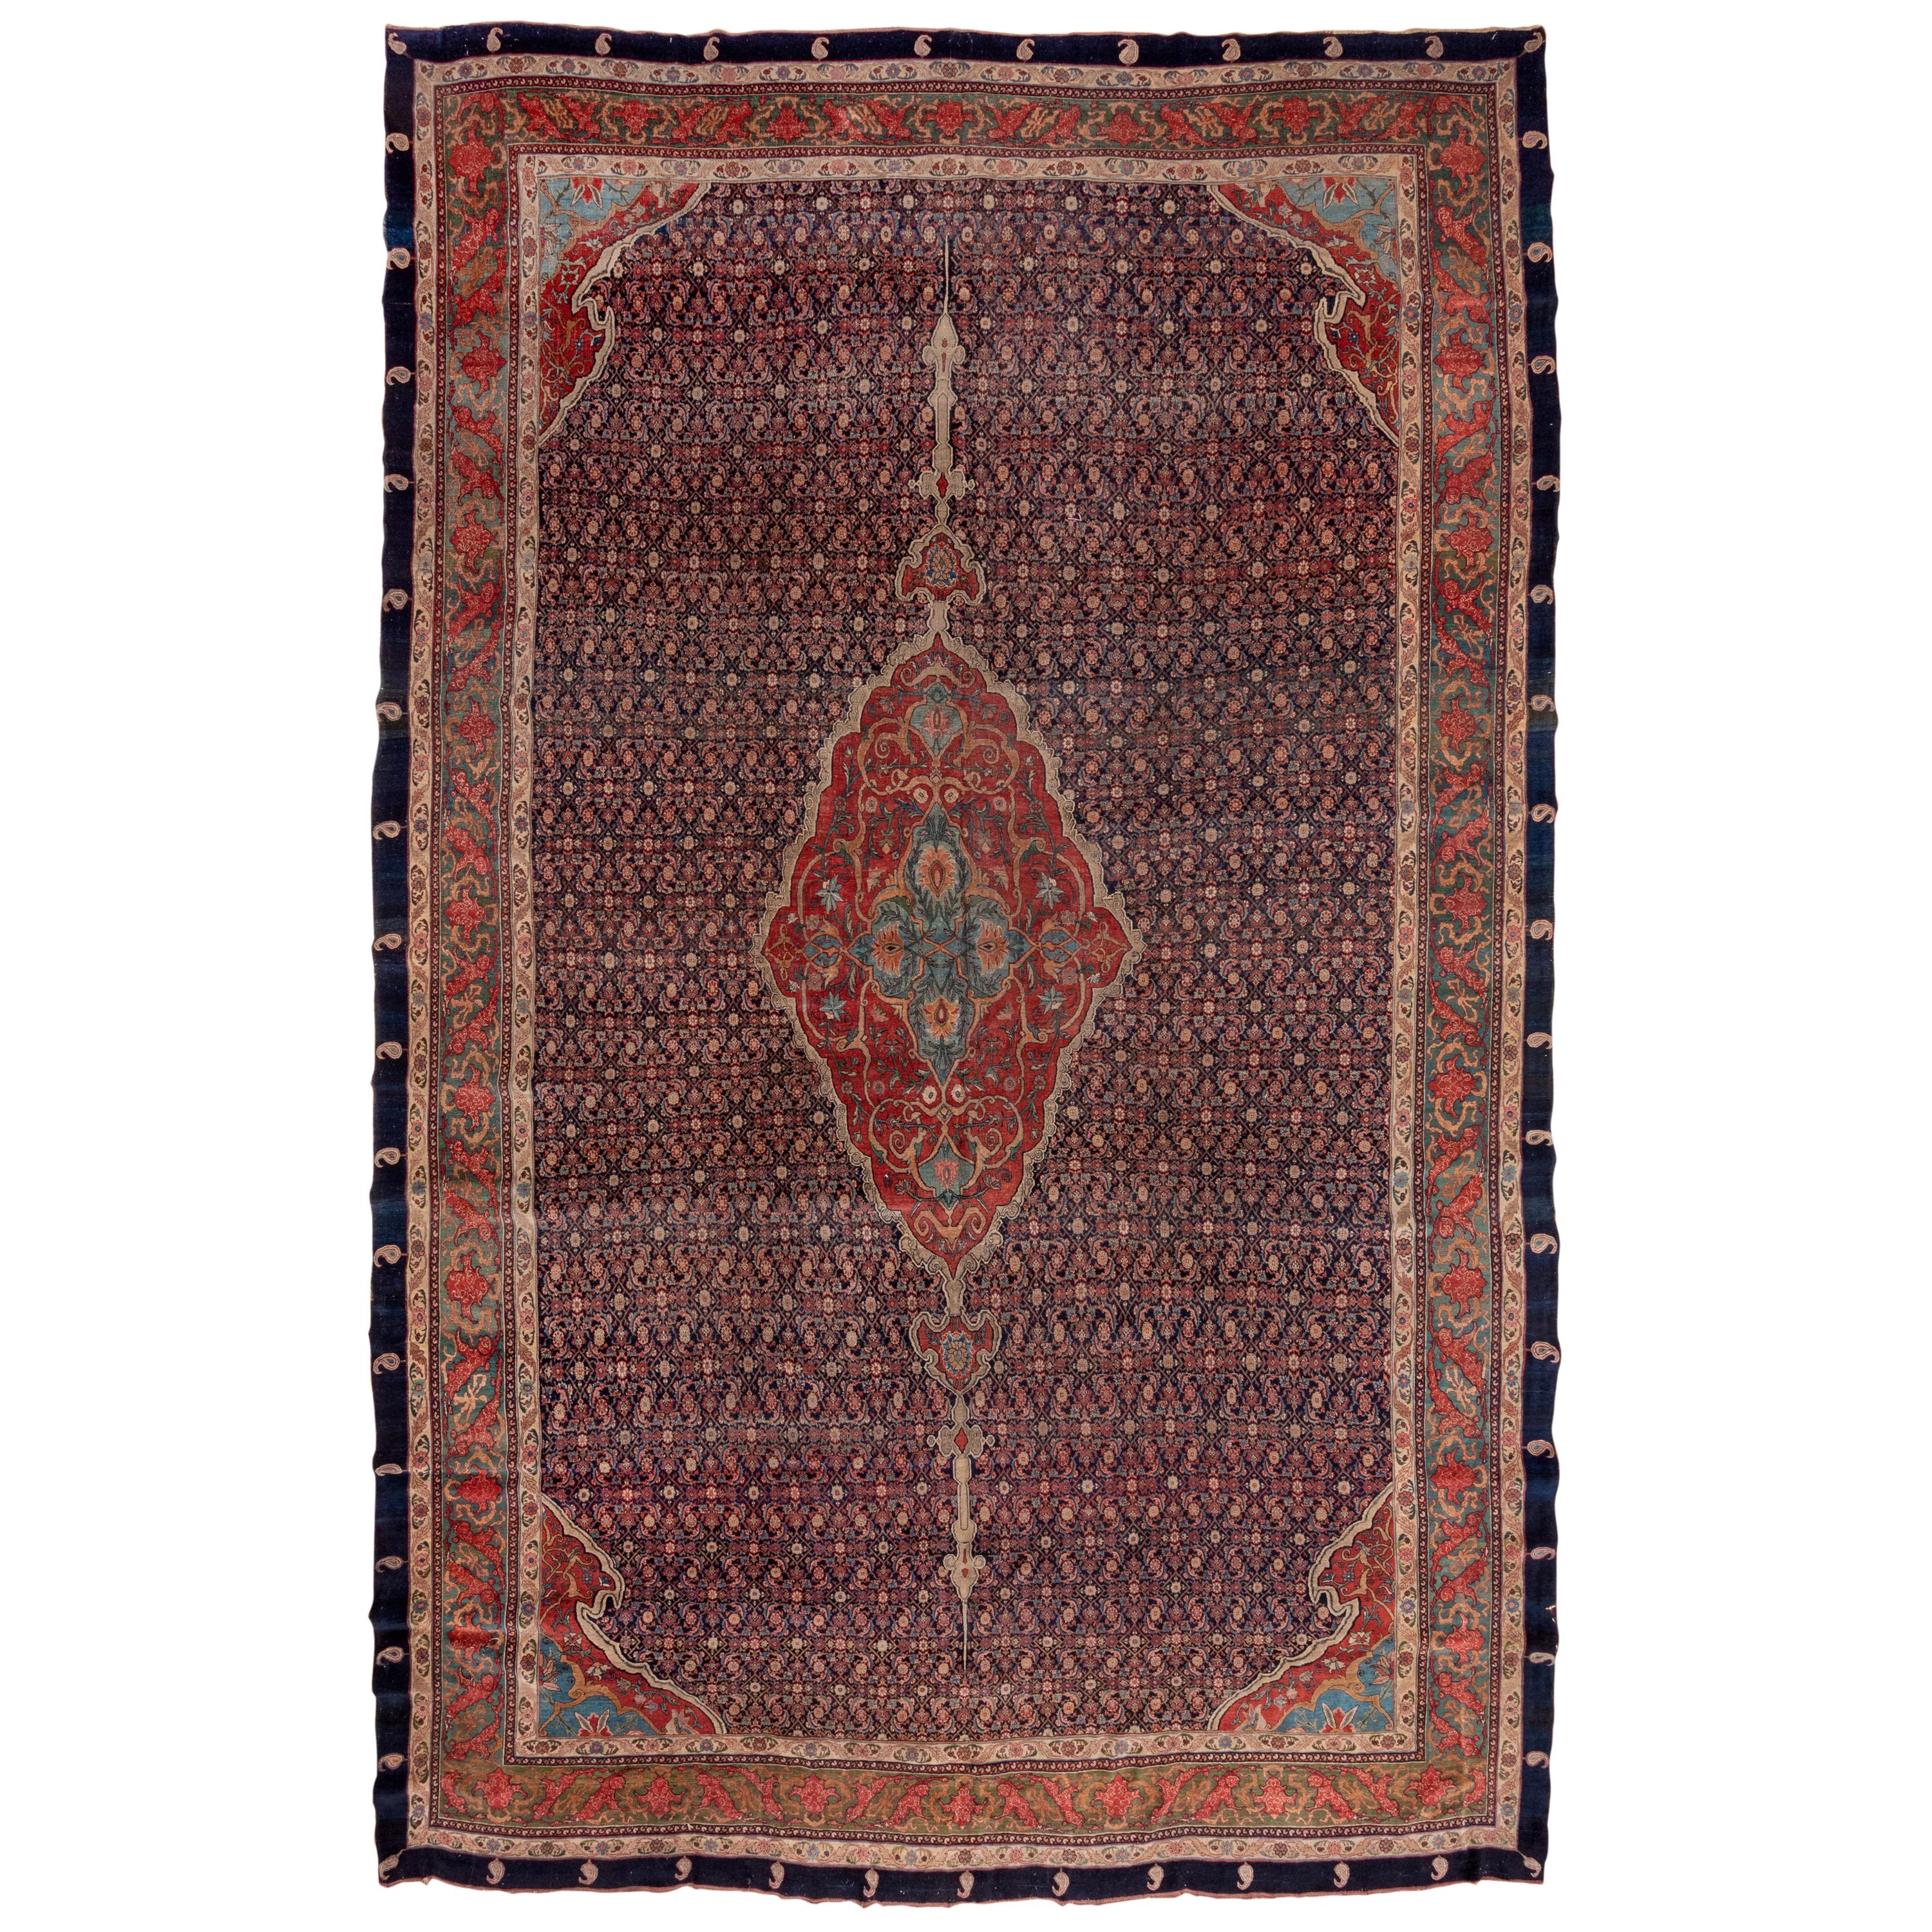 Fine Antique Bidjar Carpet with Incredible Colors and Details, Unusual Border For Sale